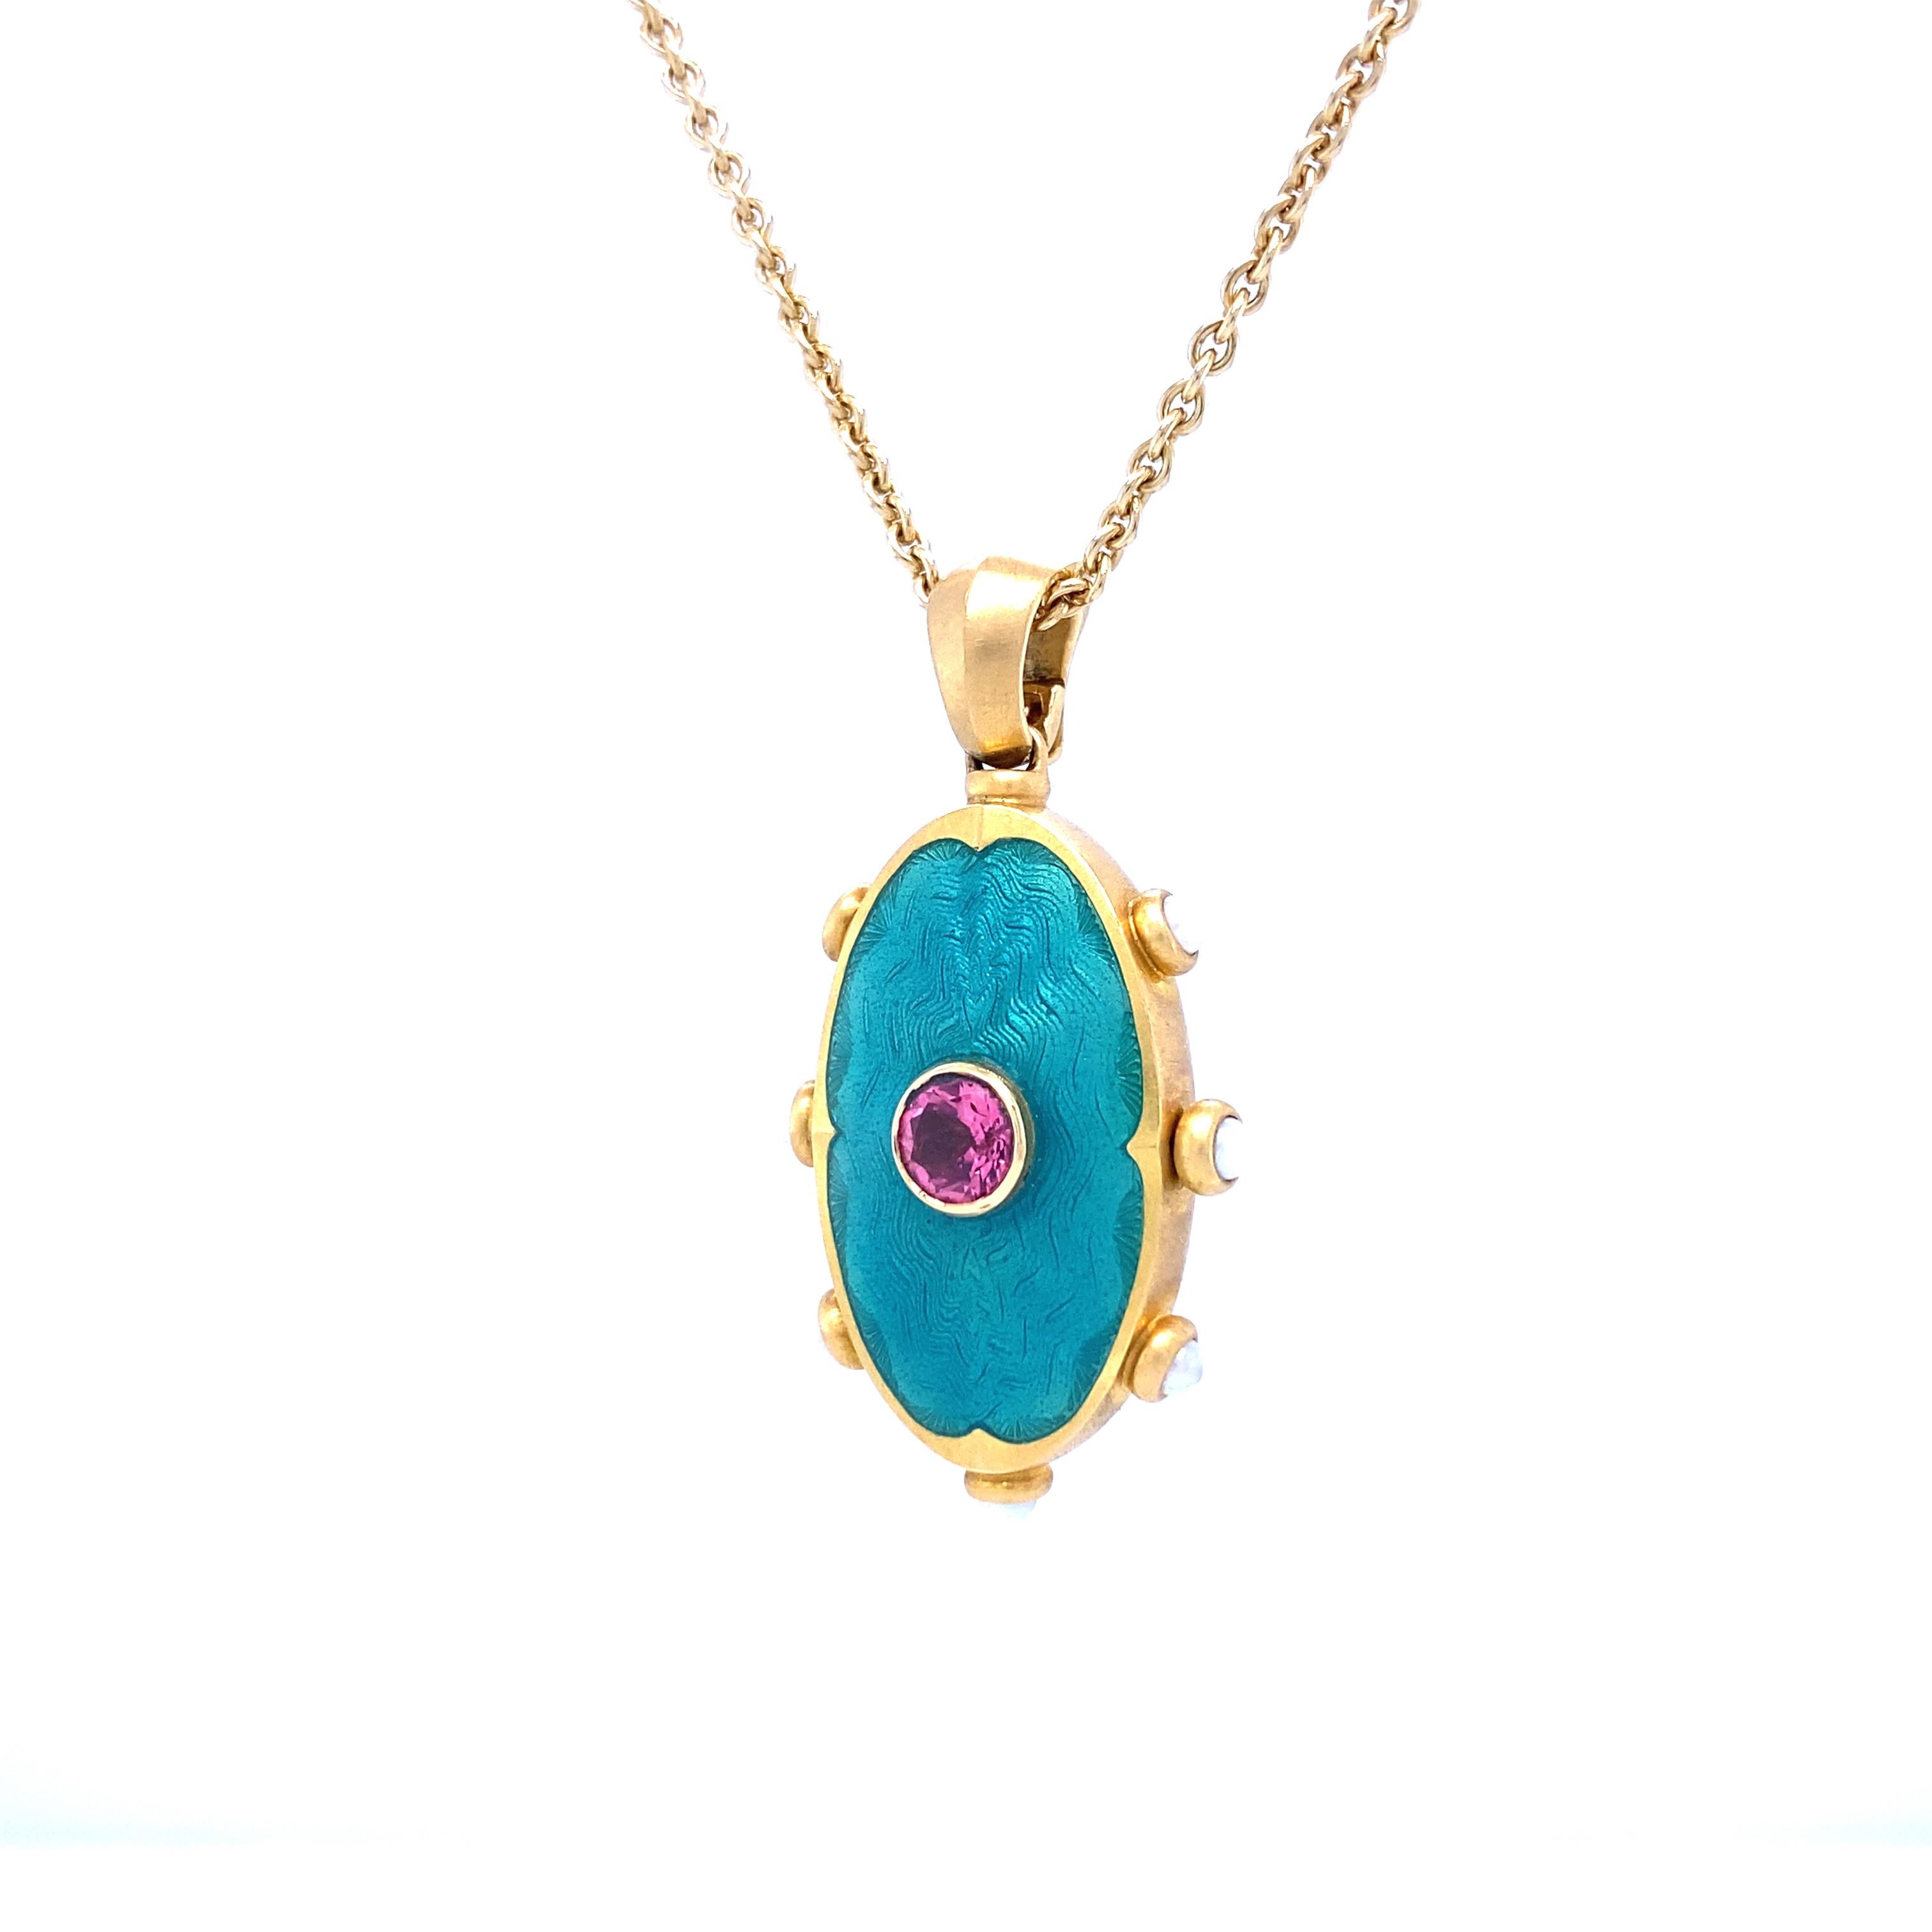 Victor Mayer oval locket pendant necklace 18k yellow gold, matt finish, Romance Collection, translucent turquoise vitreous enamel, guilloche, 1 rubellite (pink tourmaline), 7 akoya pearls, measurements app. 40.0 mm x 20.0 mm

About the creator